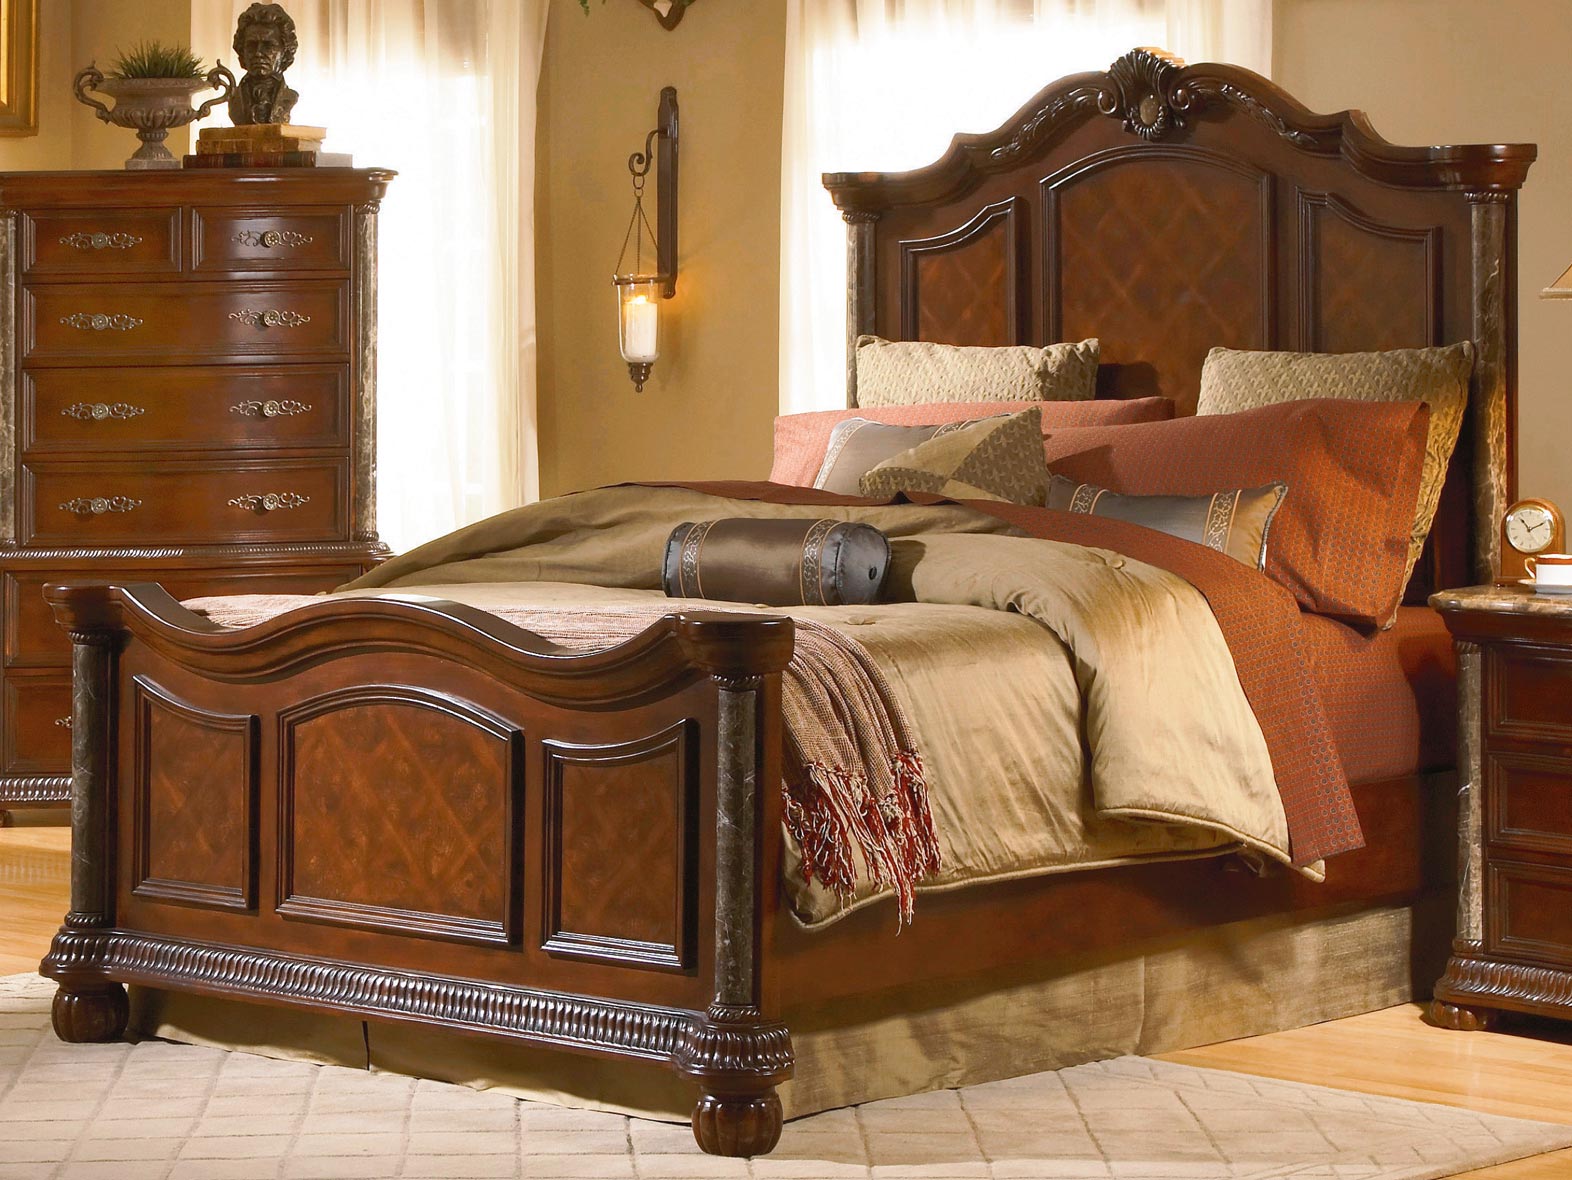 traditional bedroom furniture designs photo - 5